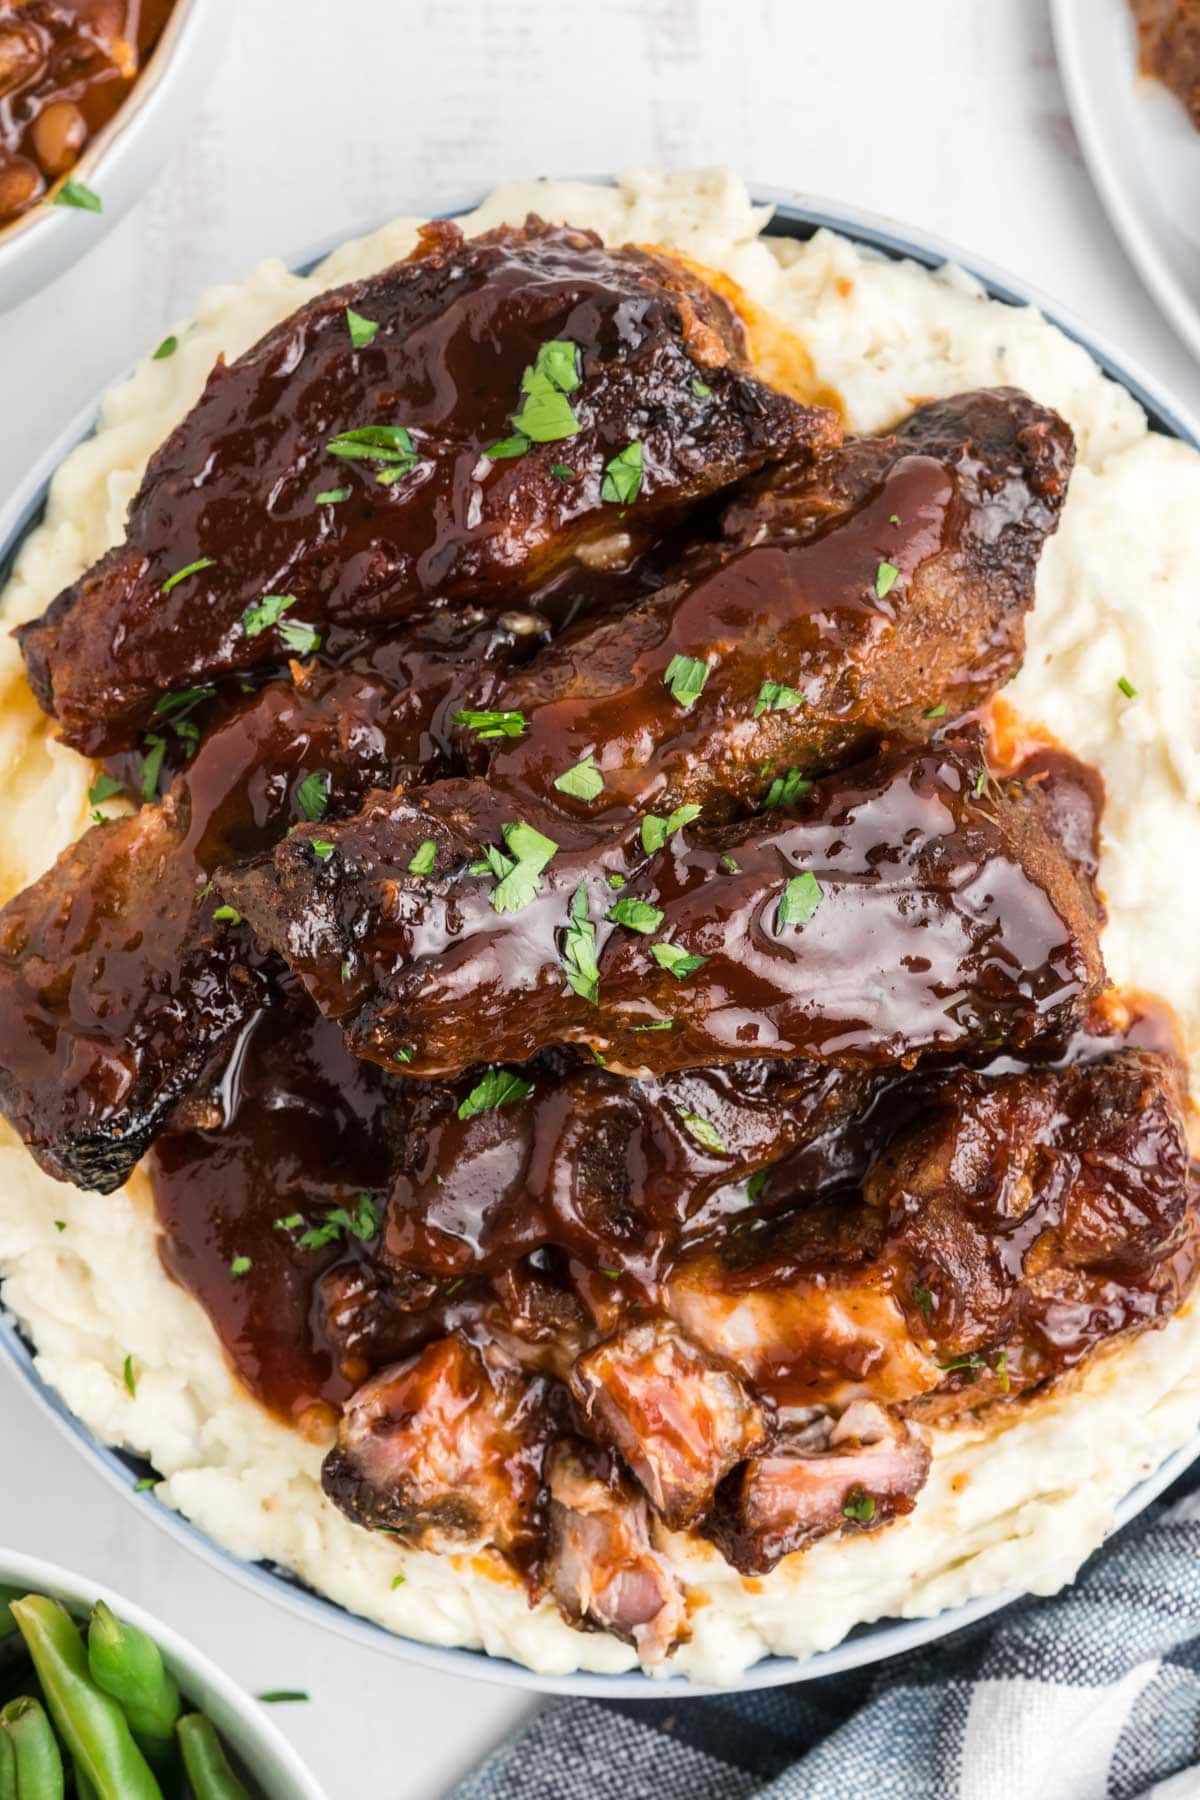 BBQ sauced boneless ribs plated over mashed potatoes.